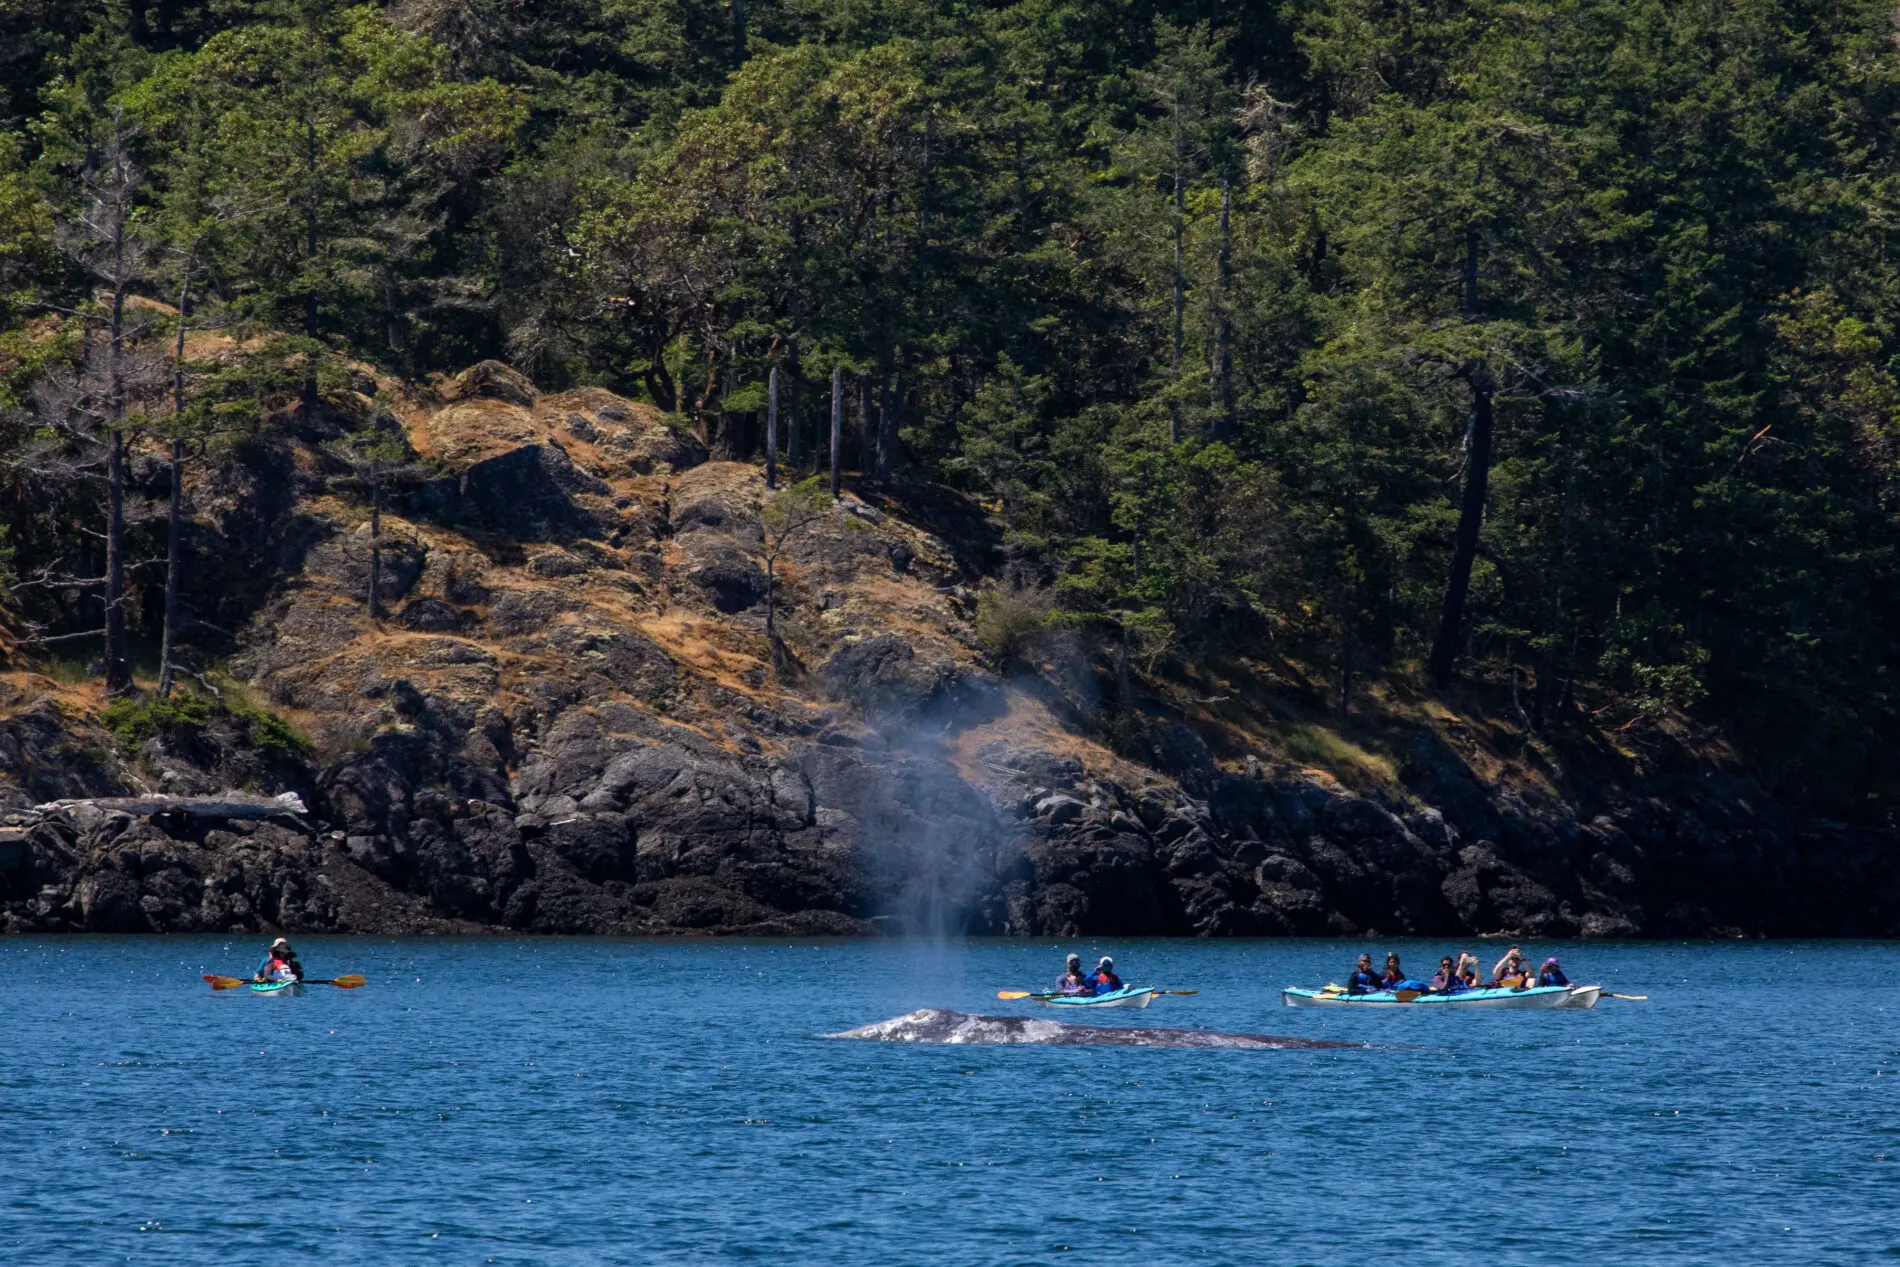 One of the best things to do in San Juan is kayak. These kayakers are treated to an up close sighting of a spouting gray whale.